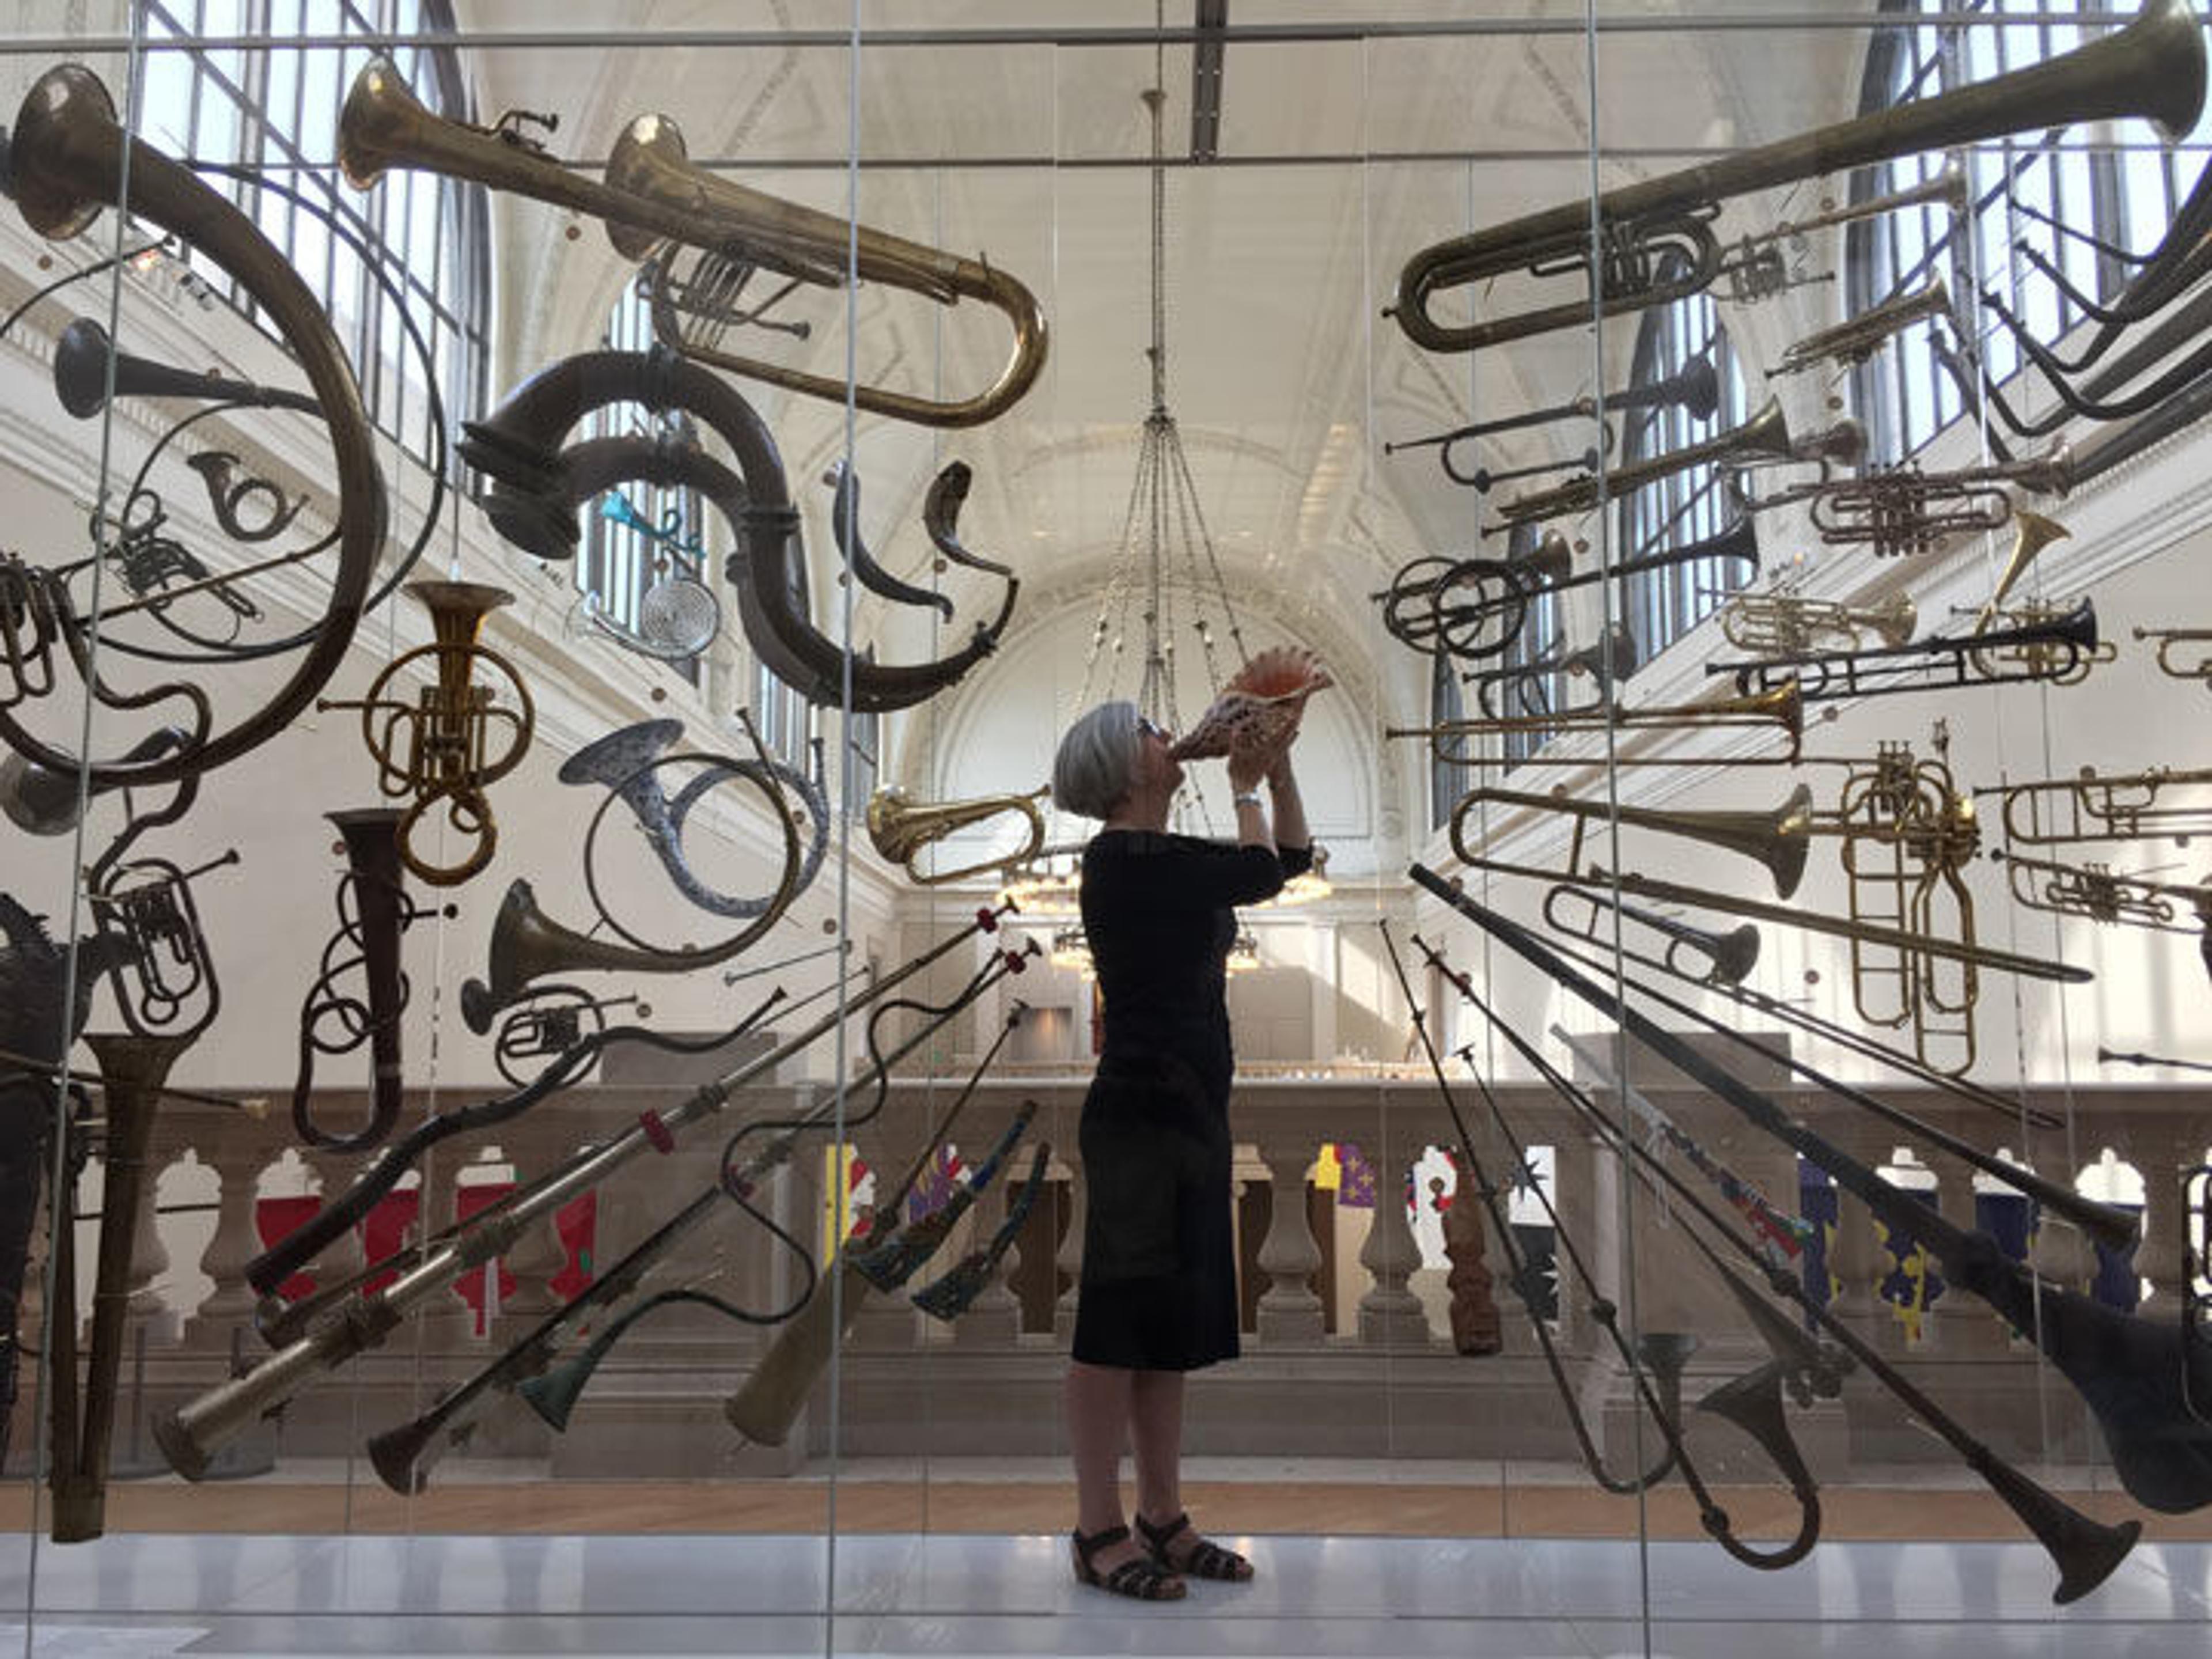 The author stands among a large display of brass instruments while blowing into a conch shell